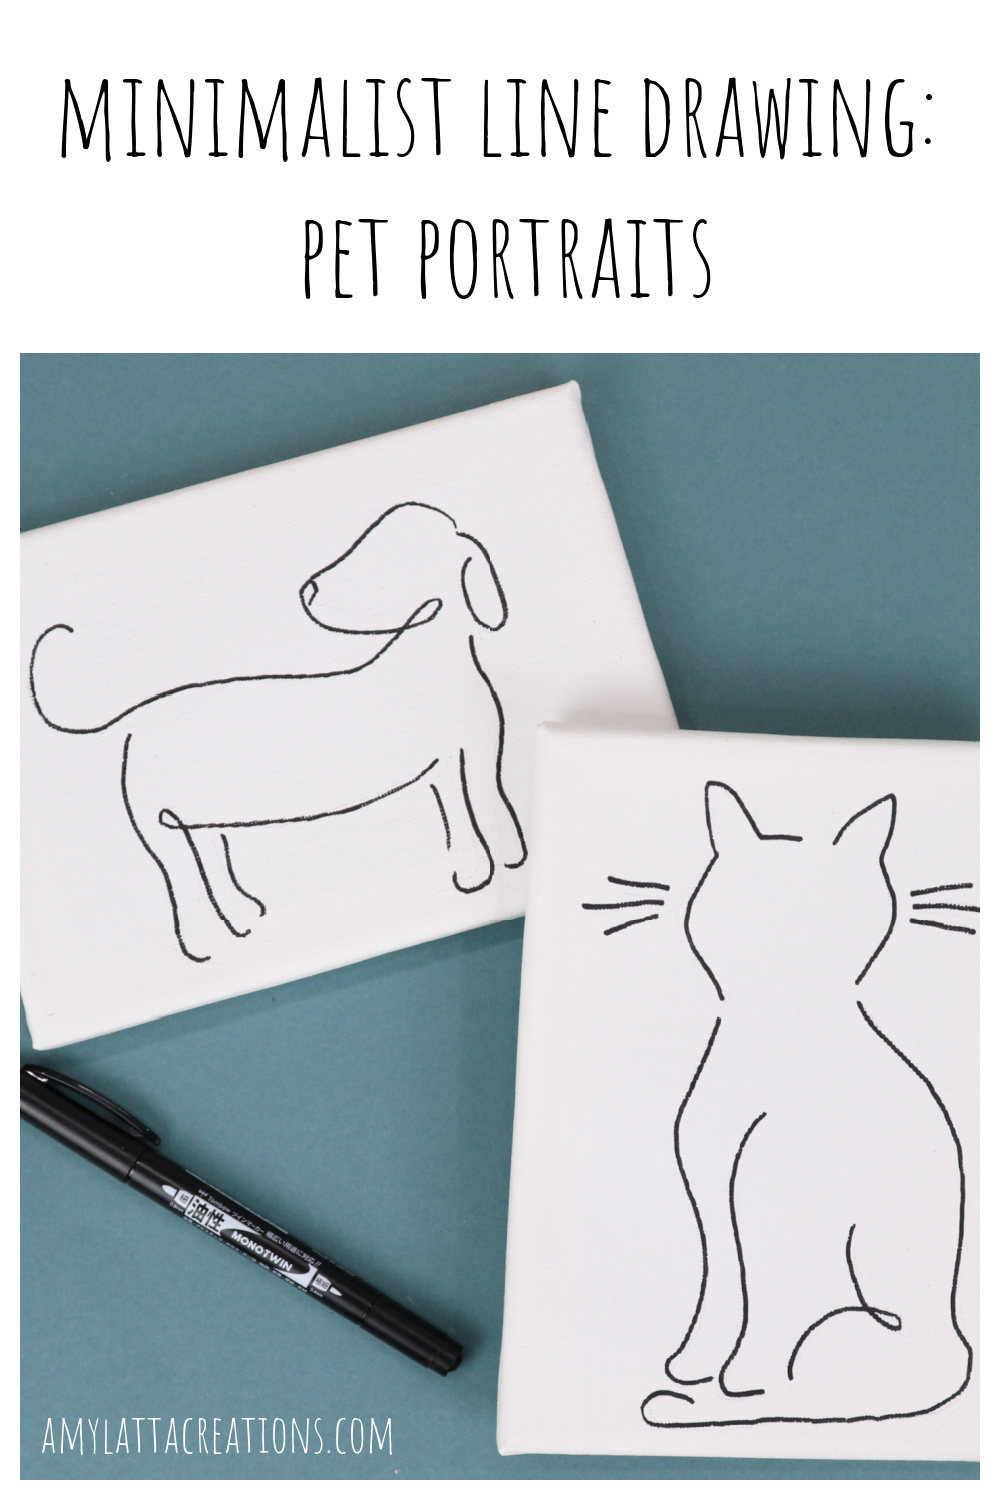 Image contains two canvases; one with a line drawing of a dog and one with a line drawing of a cat. They sit on a teal background with a black permanent marker.